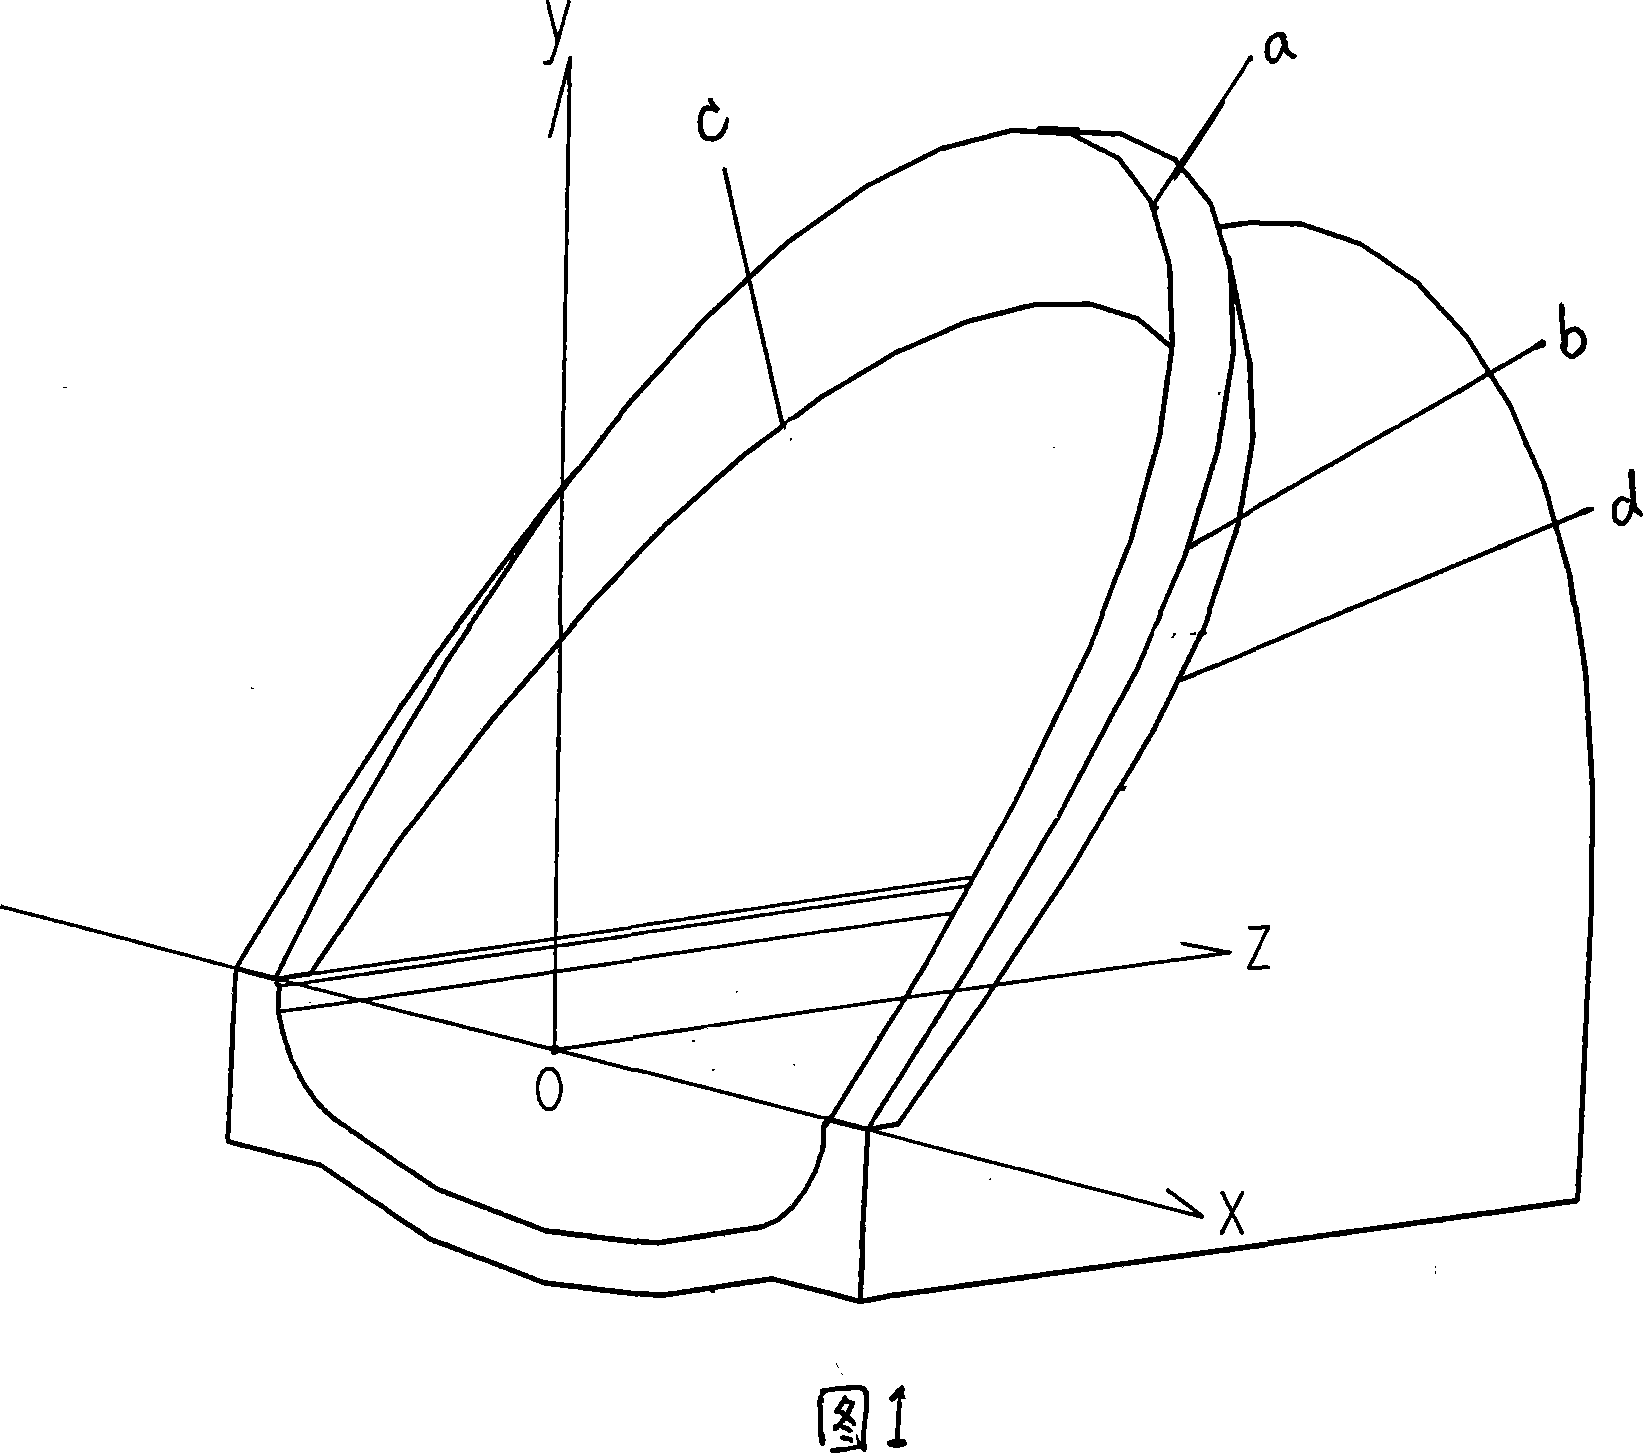 Railway large-bore tunnel oval-shaped table-board cap brim bias-cutting type hole-door construction method